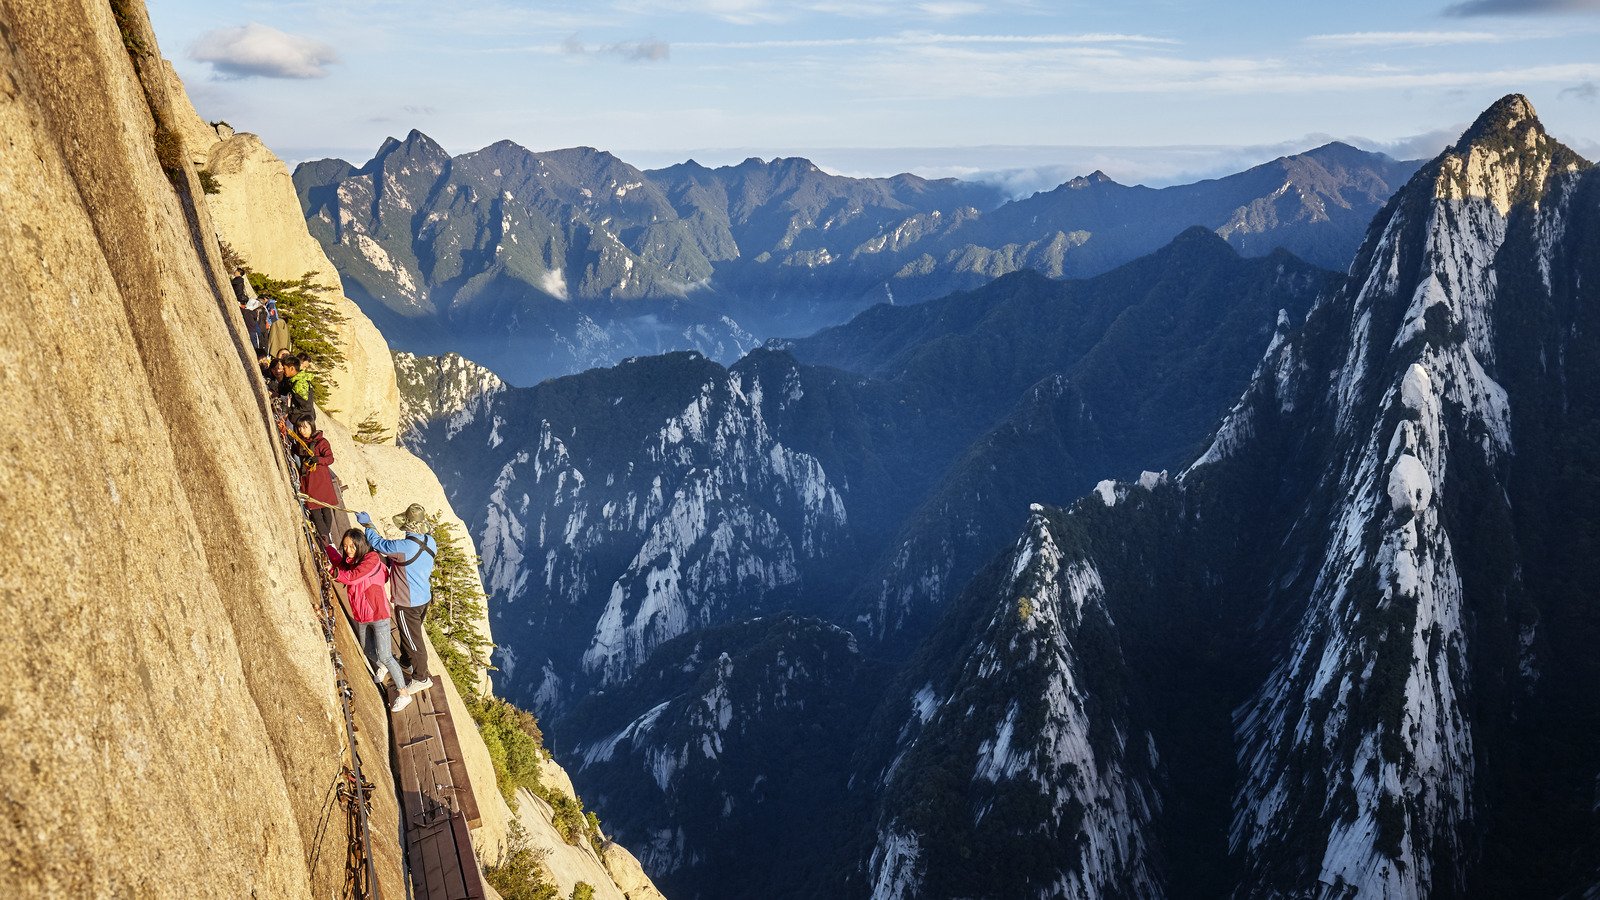 This Hike In China Is Considered One Of The Most Dangerous In The World